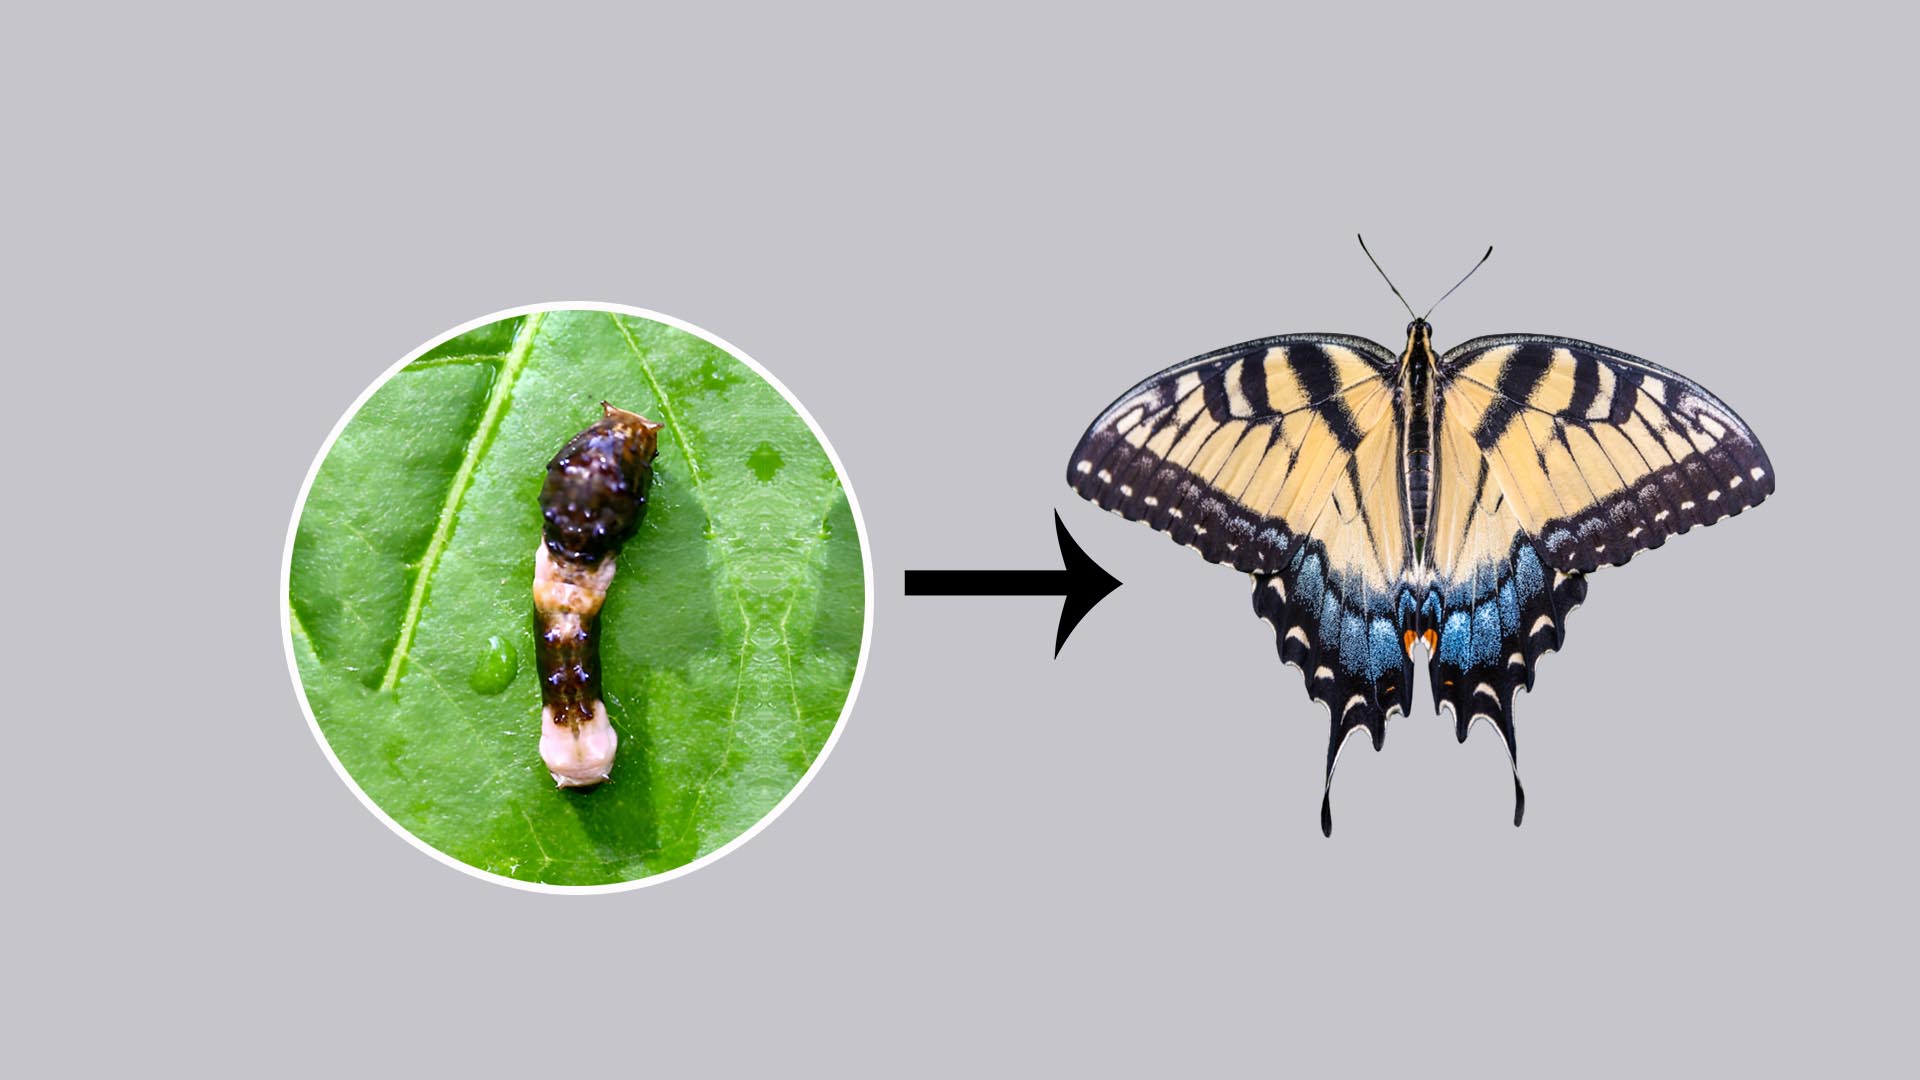 Giant Swallowtail Butterflies Life Cycle with Caterpillar Stages